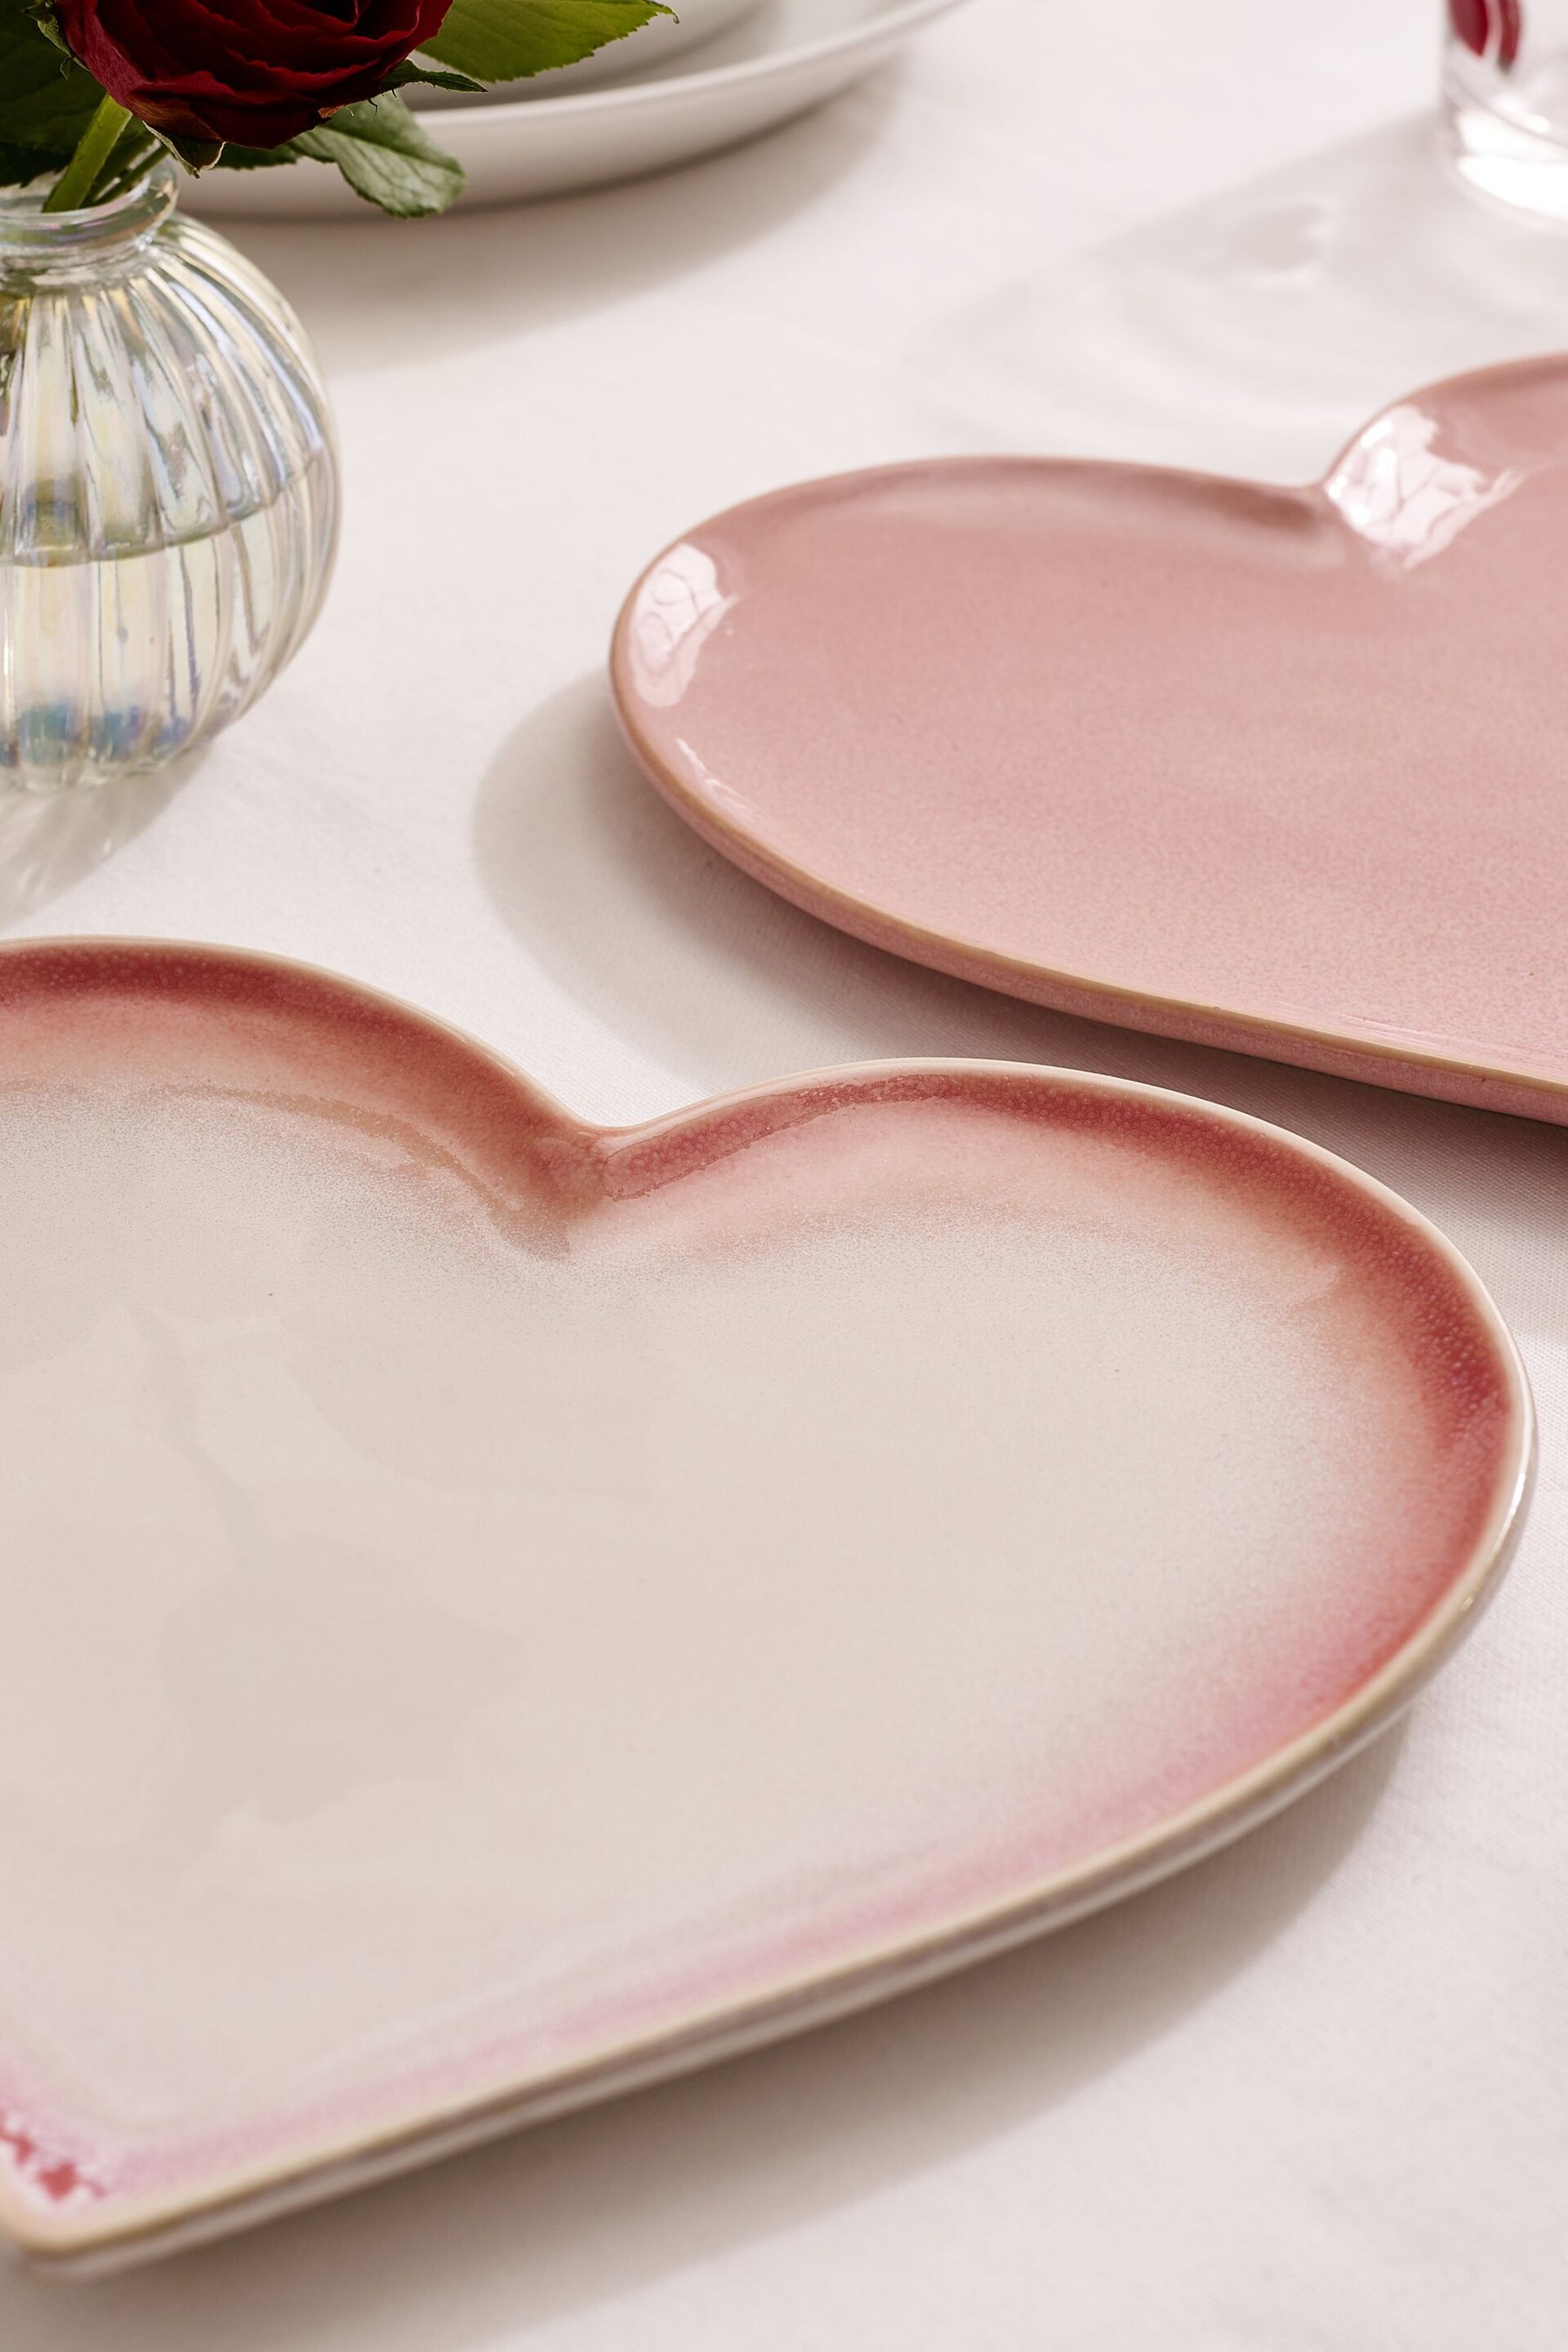 Set of 2 Pink Heart Shaped Side Plates - Image 2 of 3